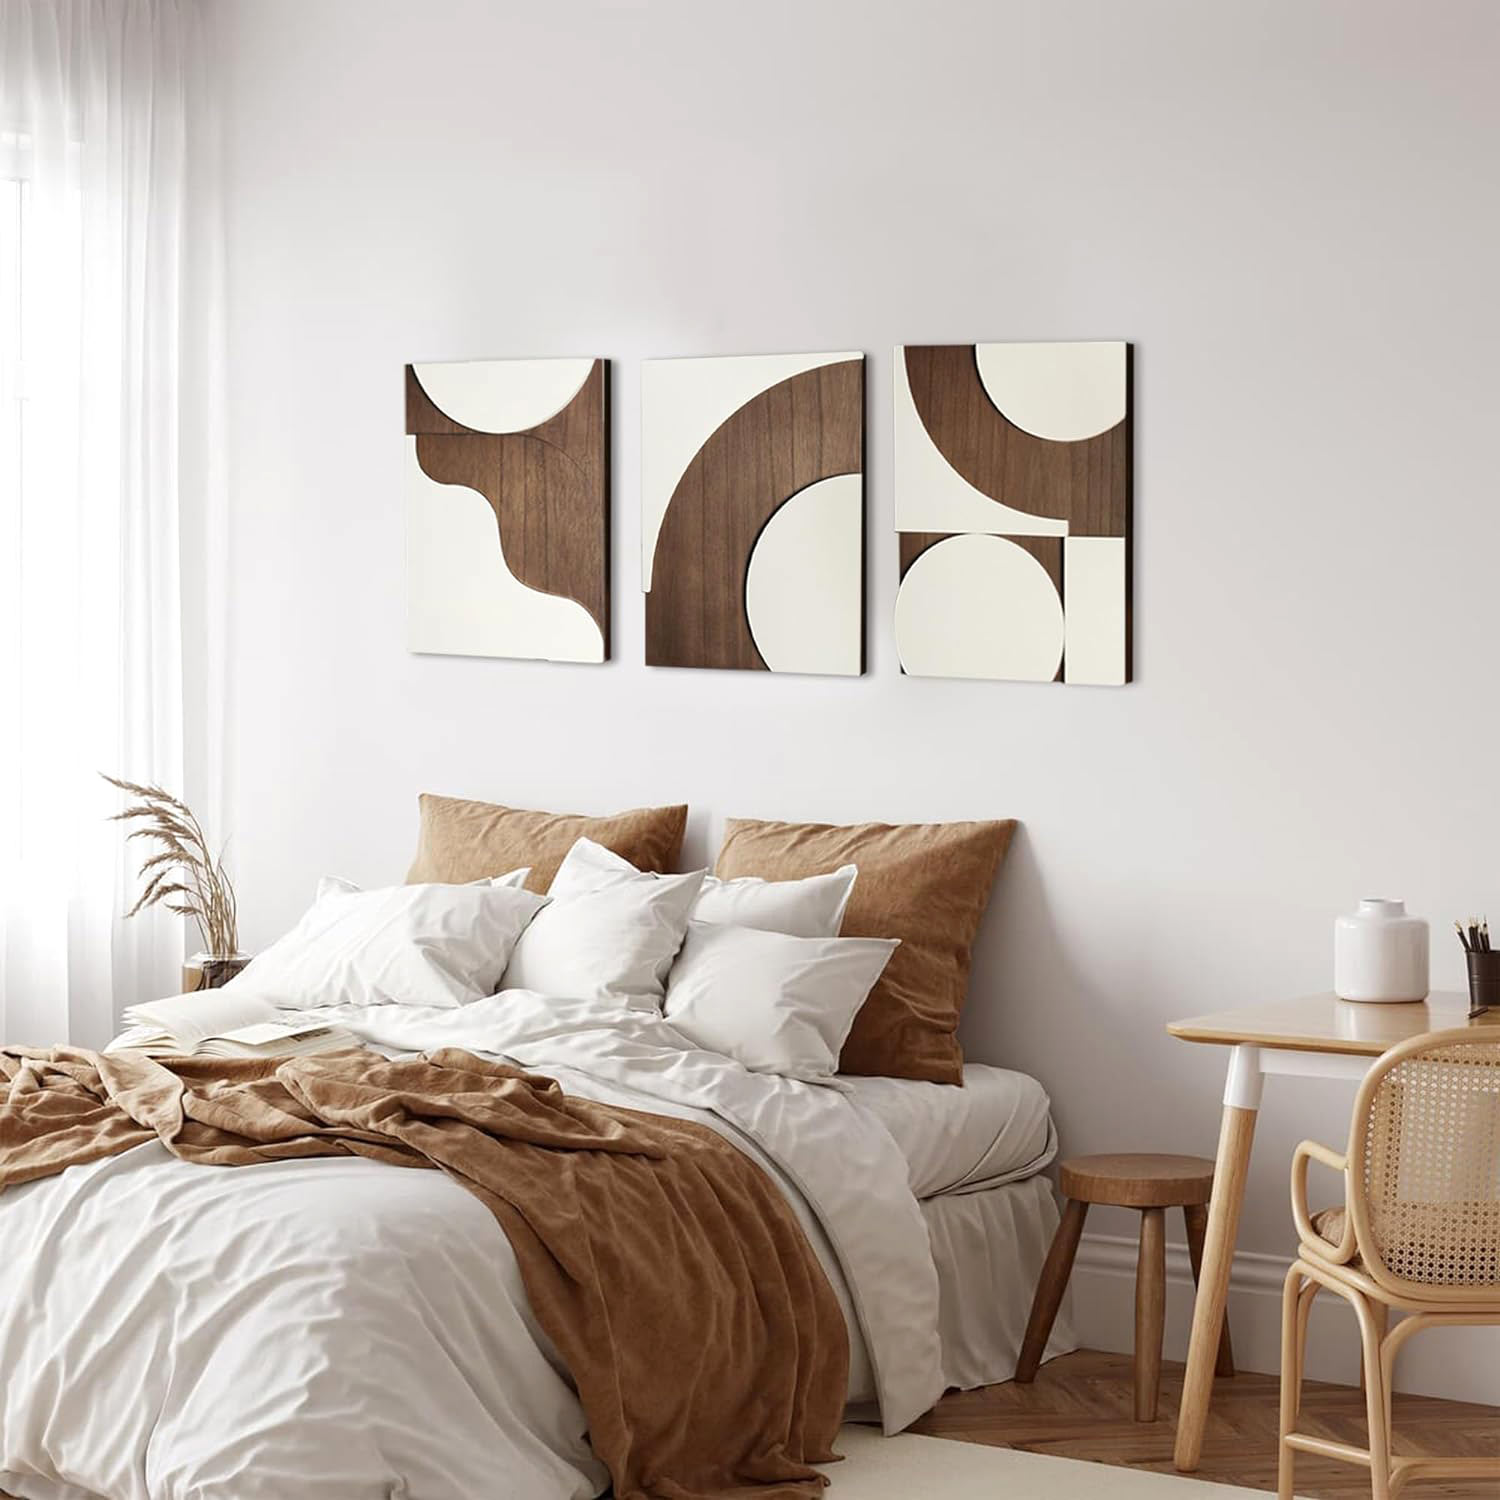 Bedroom with white brown bedding and abstract geometric wall art